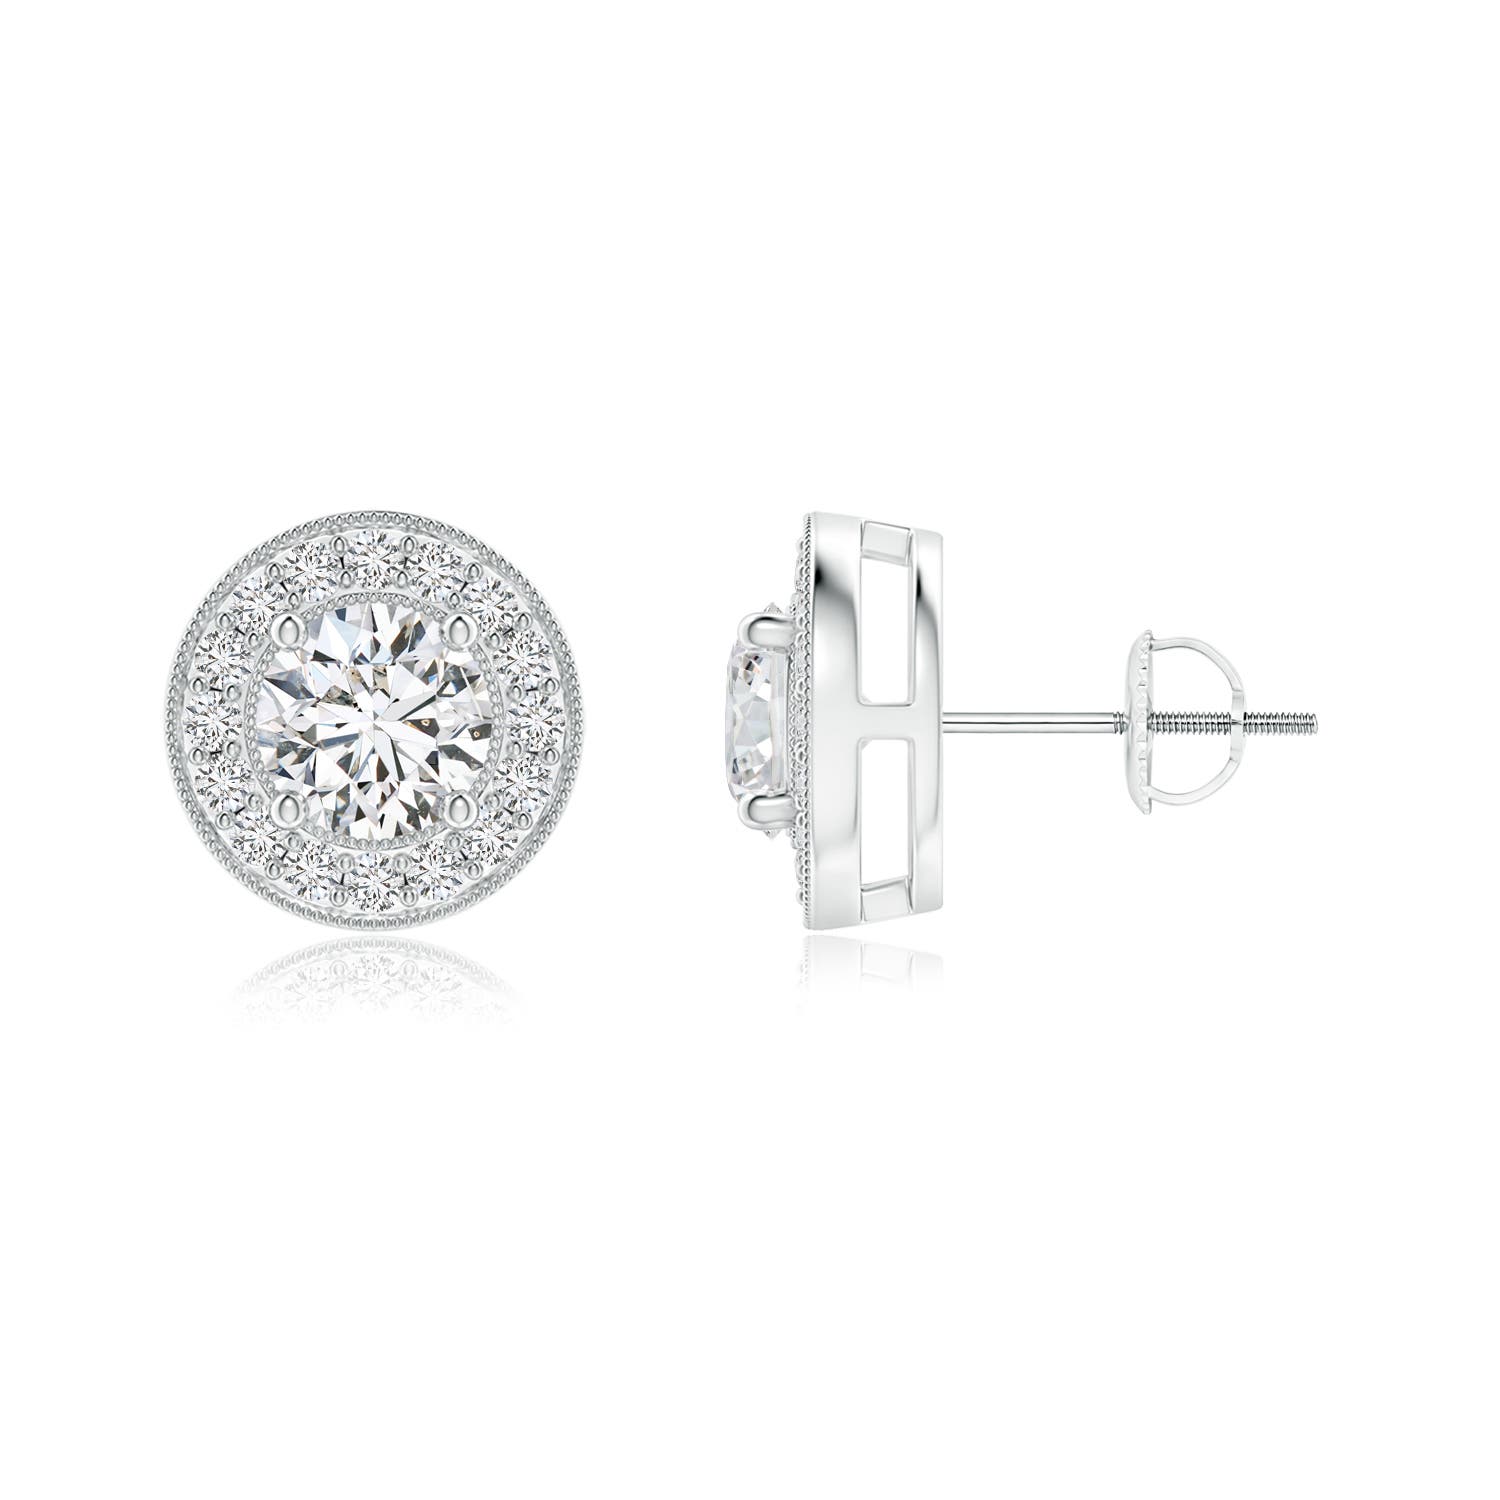 H, SI2 / 0.99 CT / 14 KT White Gold